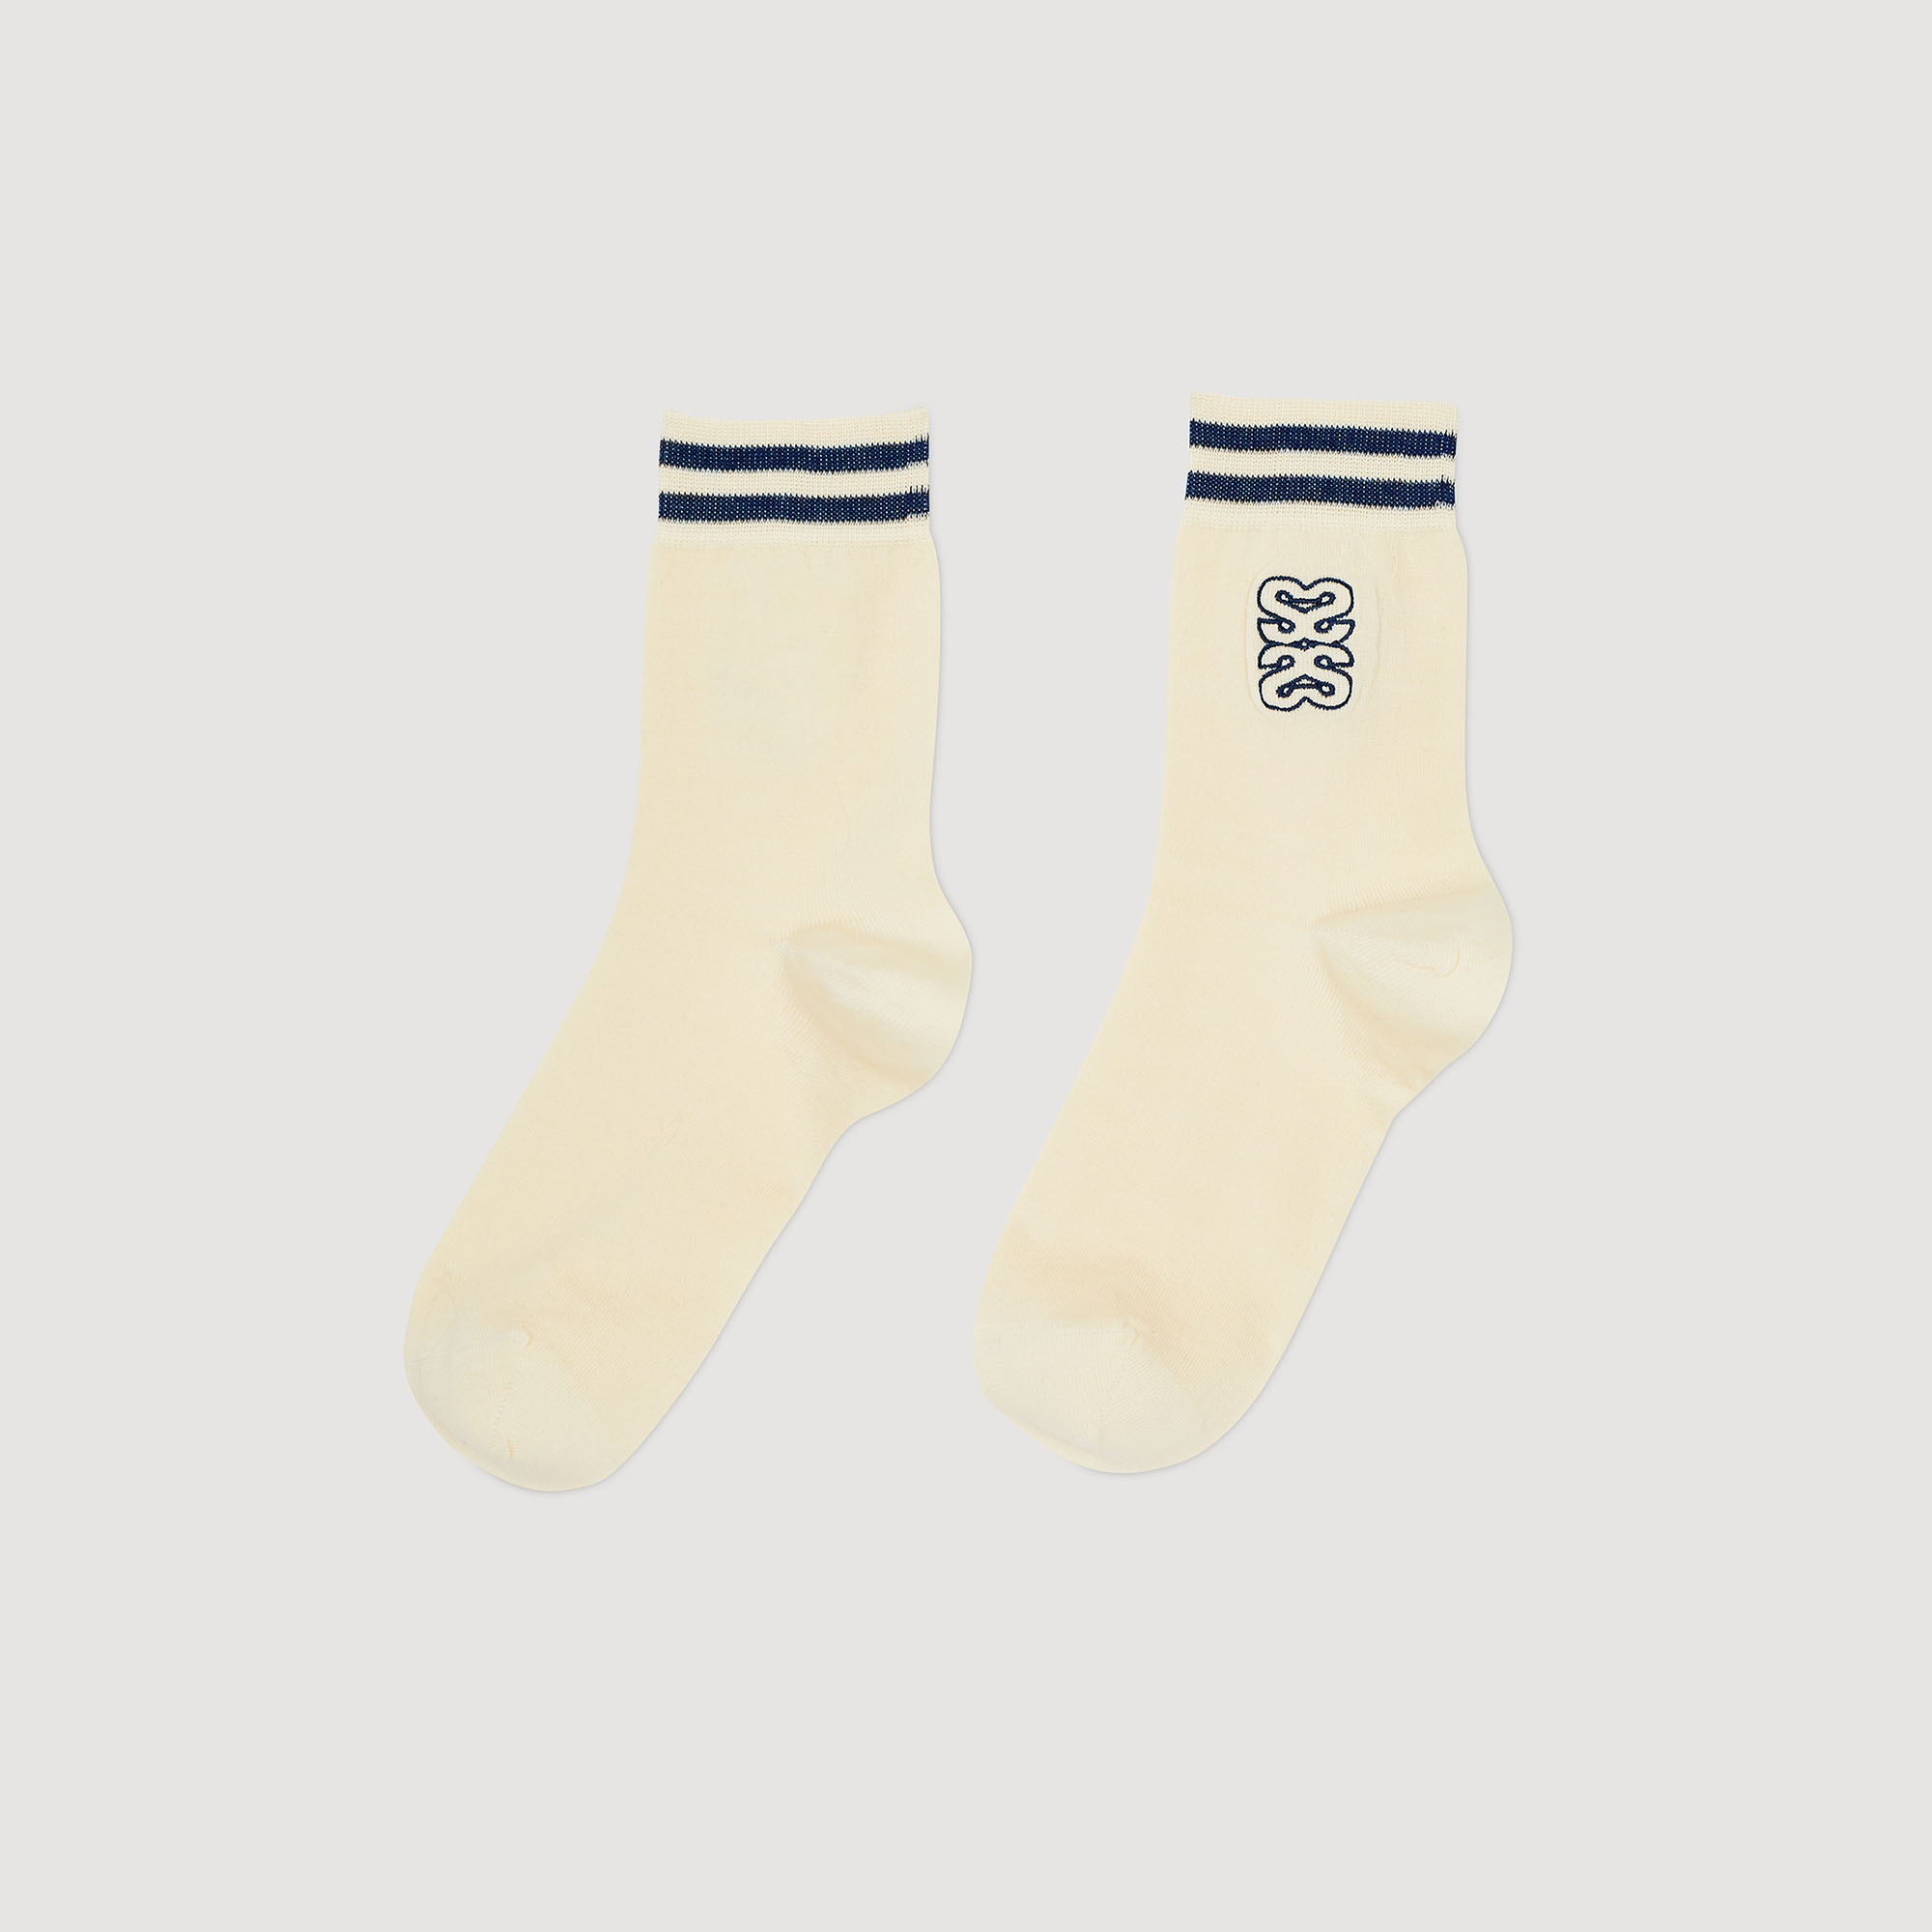 Sandro cotton Ribbed socks embellished with an embroidered double S logo